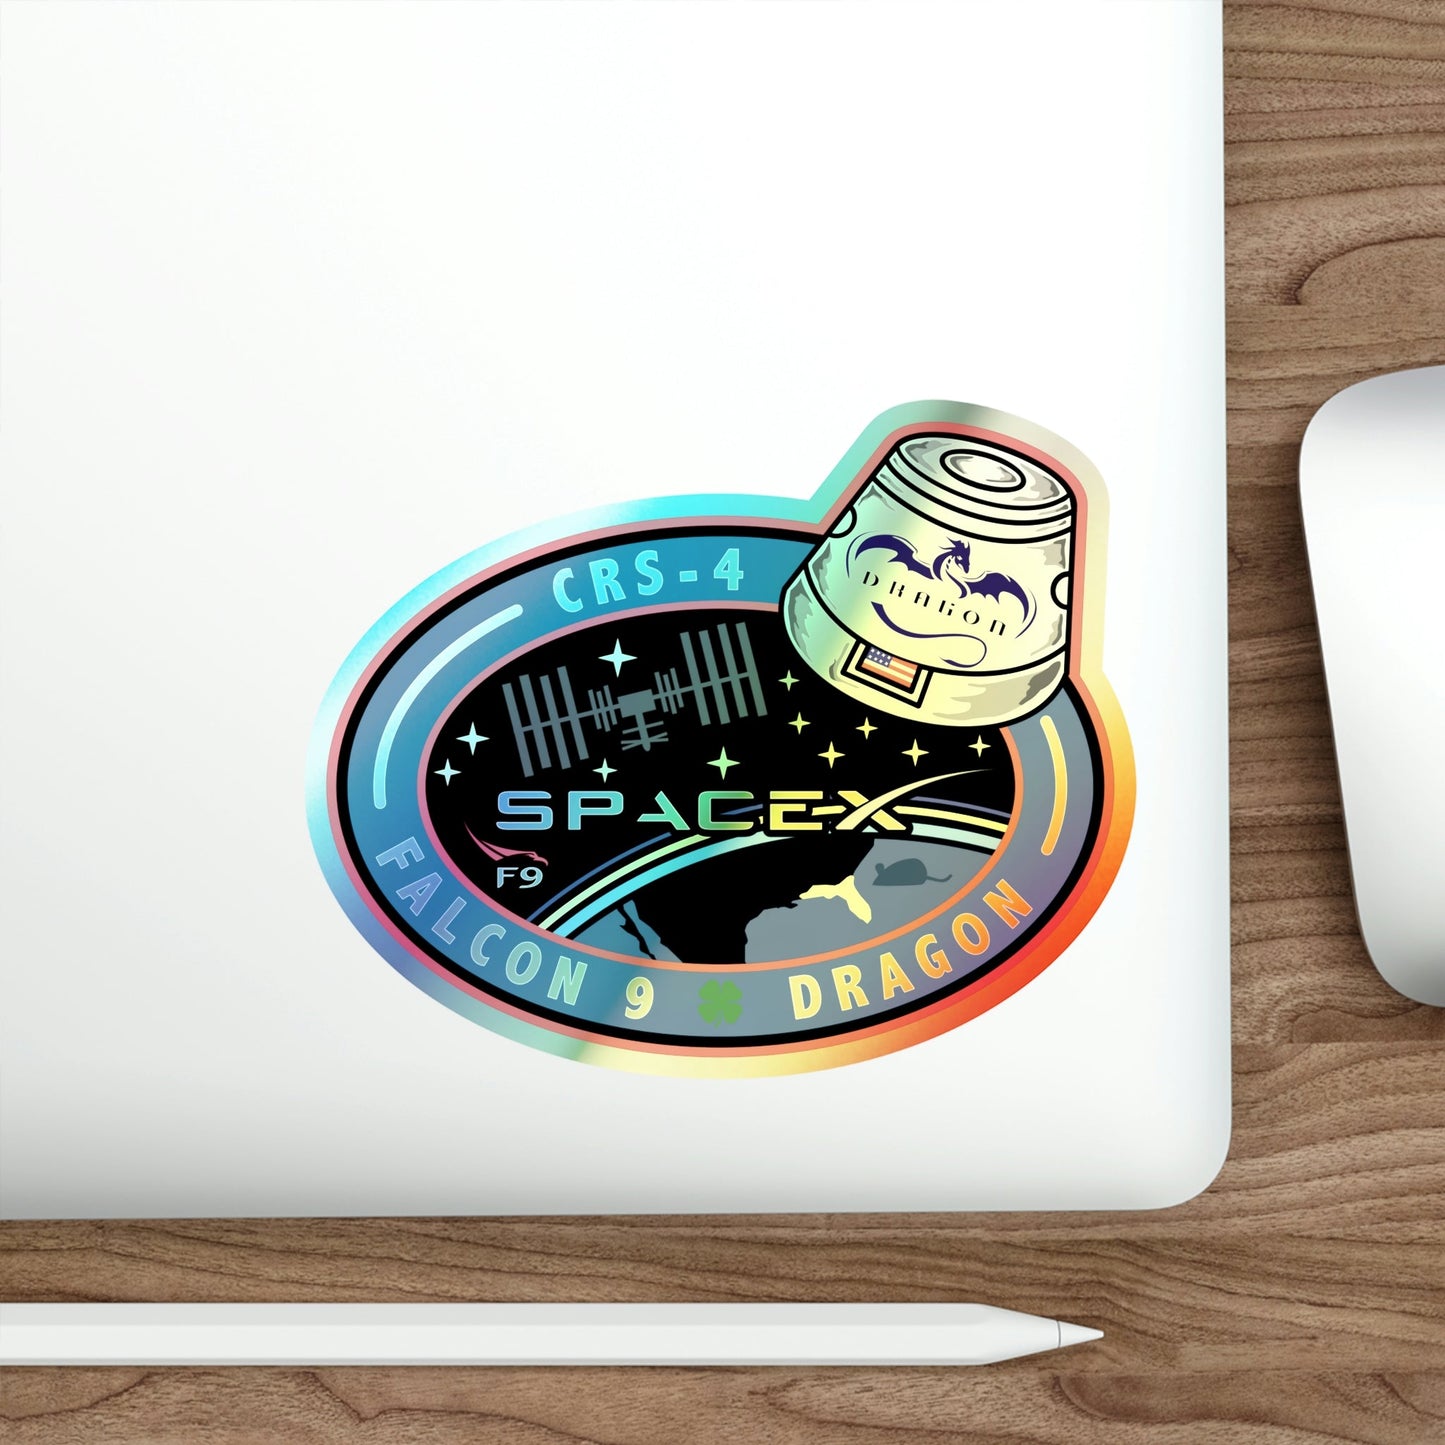 CRS-4 (SpaceX) Holographic STICKER Die-Cut Vinyl Decal-The Sticker Space